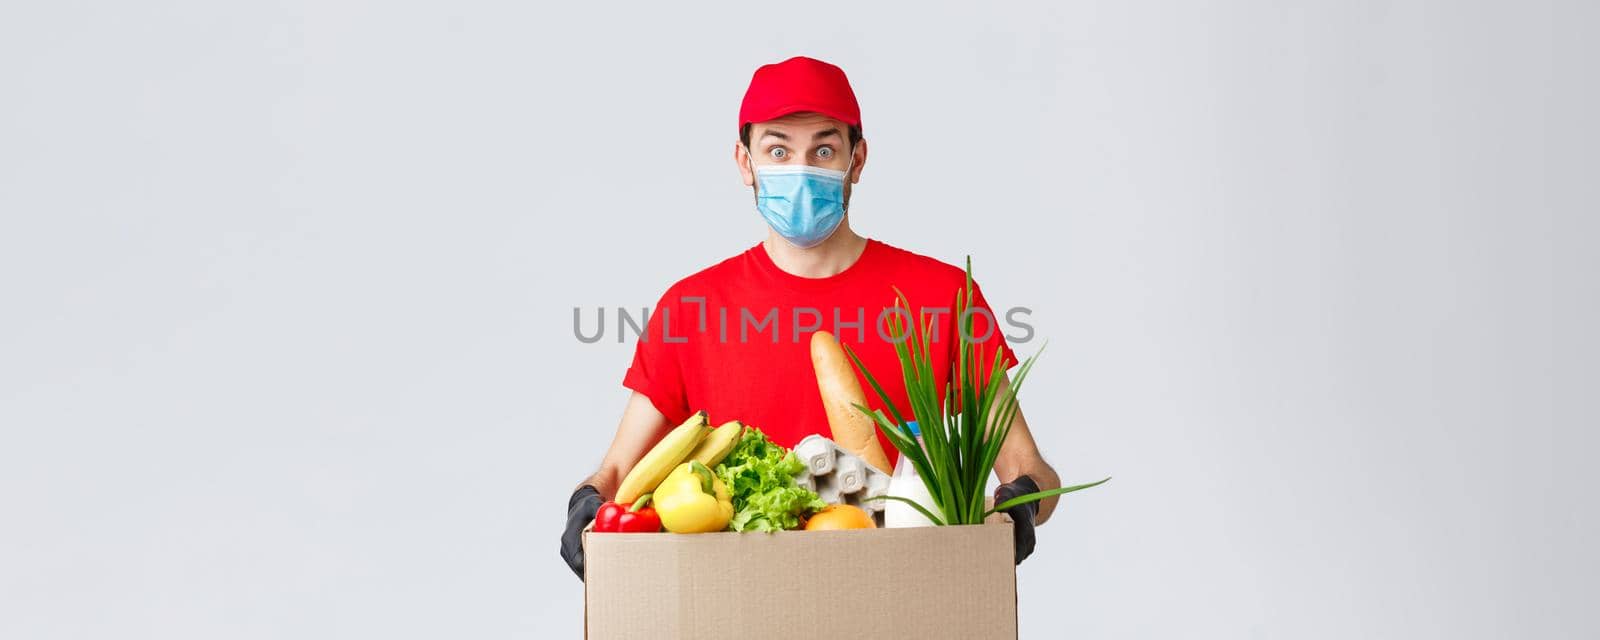 Groceries and packages delivery, covid-19, quarantine and shopping concept. Serious courier in red uniform, gloves and protective face mask, deliver package box to client house during coronavirus.